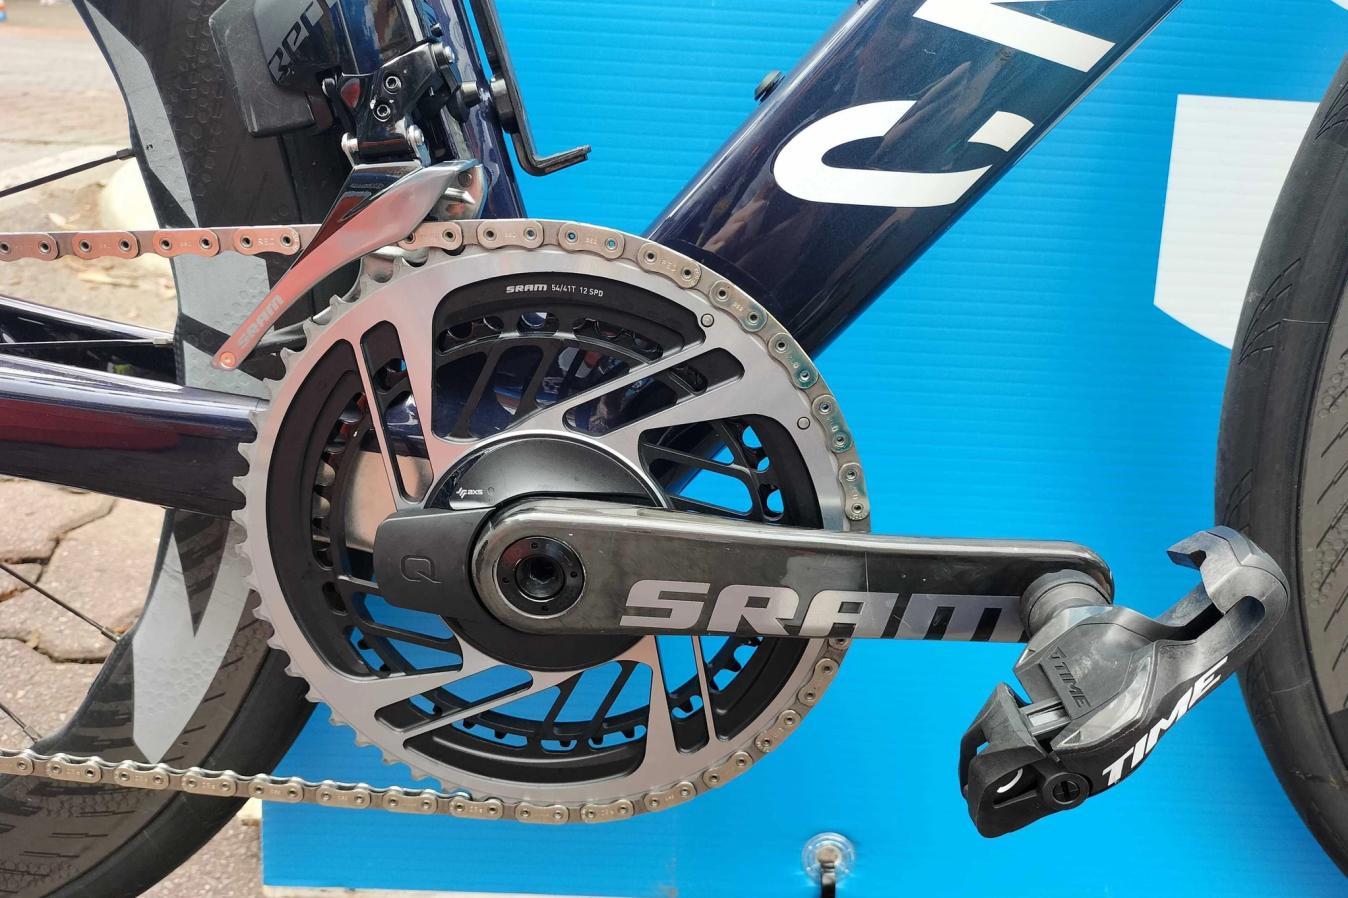 A SRAM Red AXS 54/41t chainset